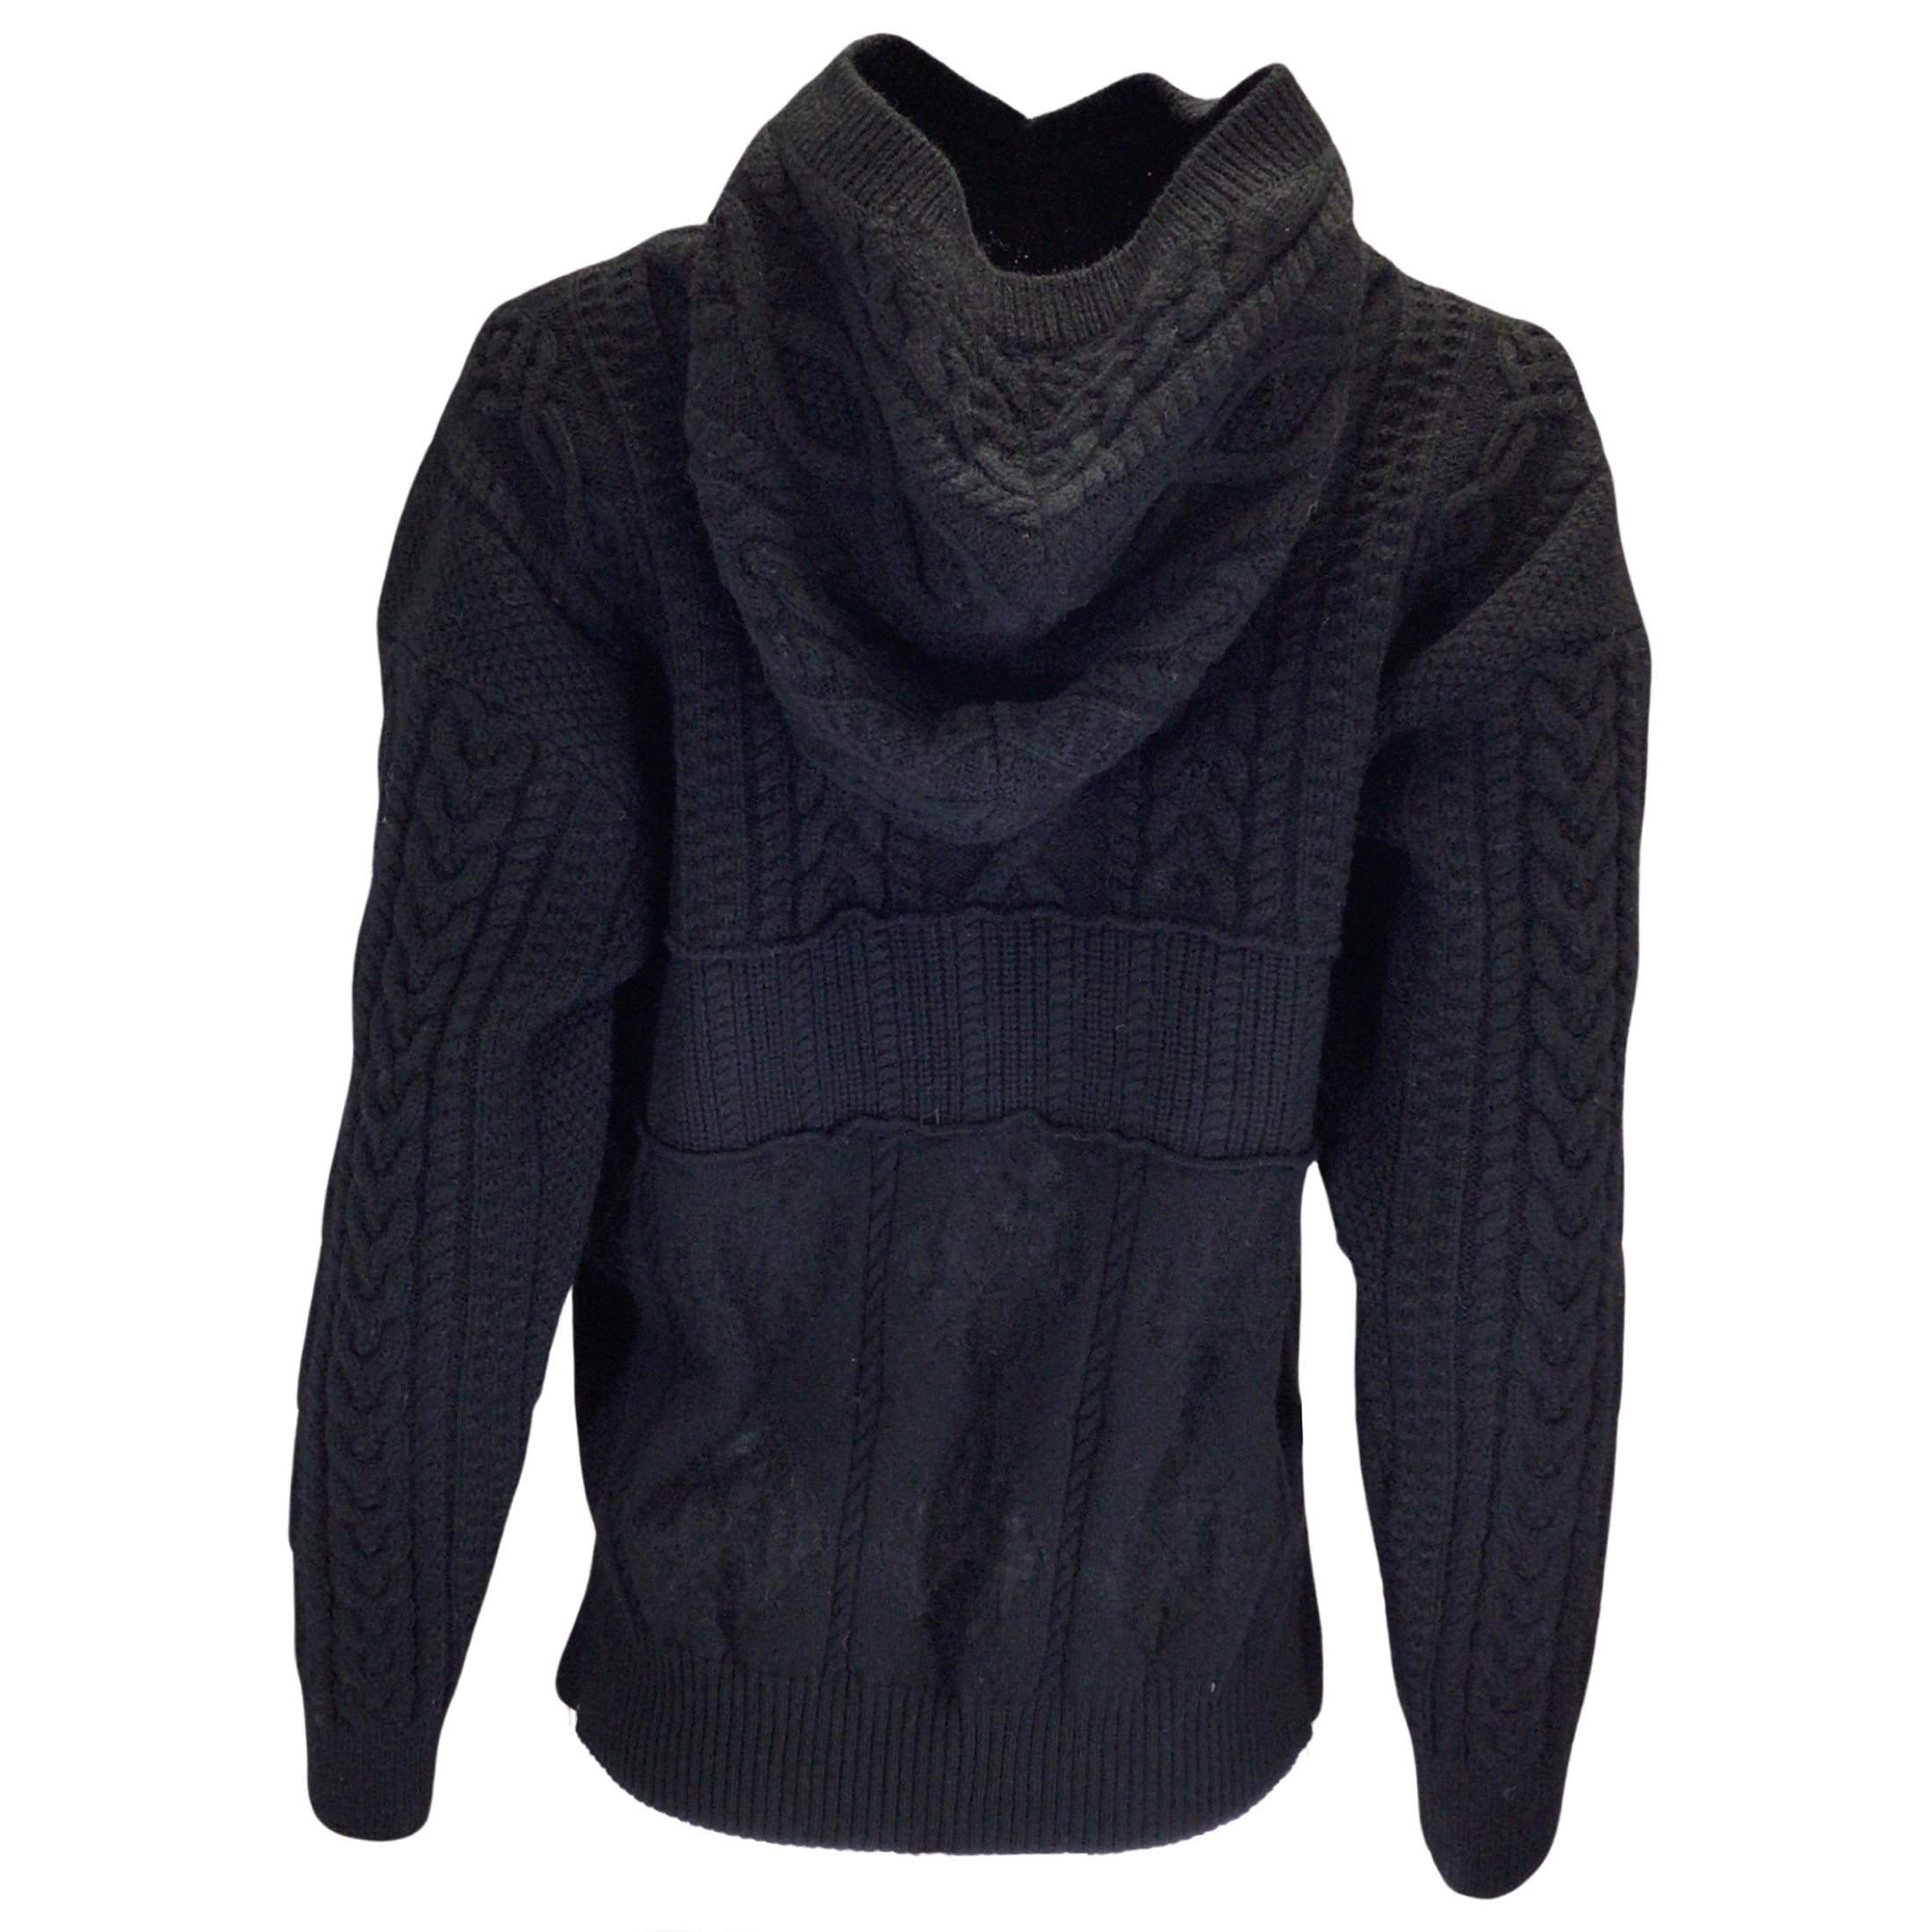 Tao by Comme des Garcons Black Hooded Cable Knit Sweater